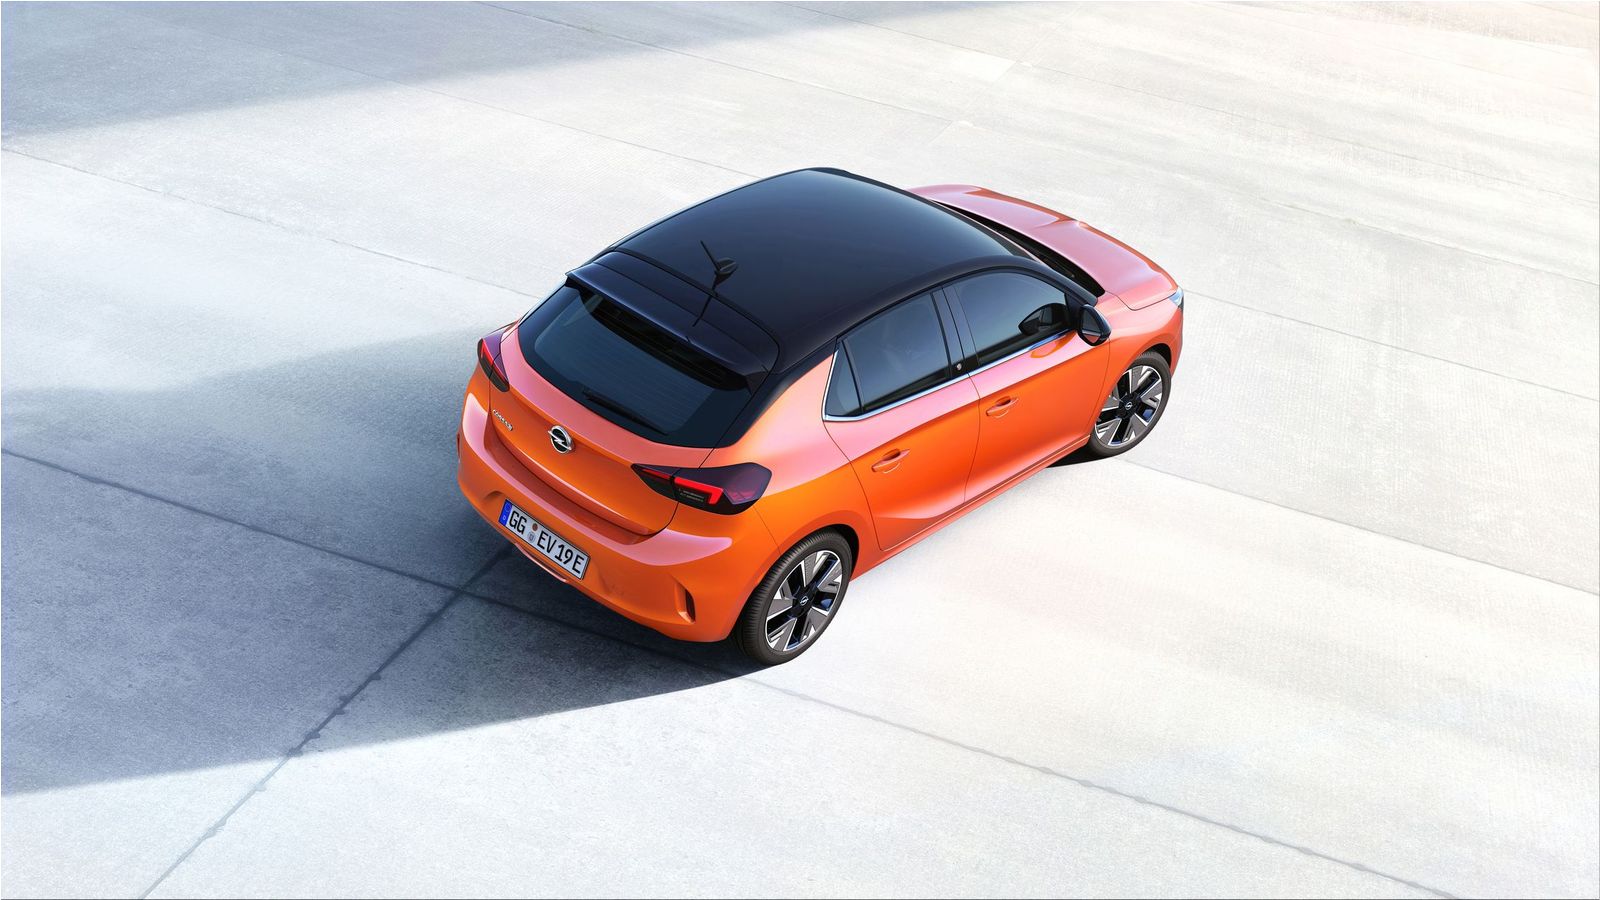 New Opel Corsa Unveiled In Pure Electric Form With 134 HP And 330